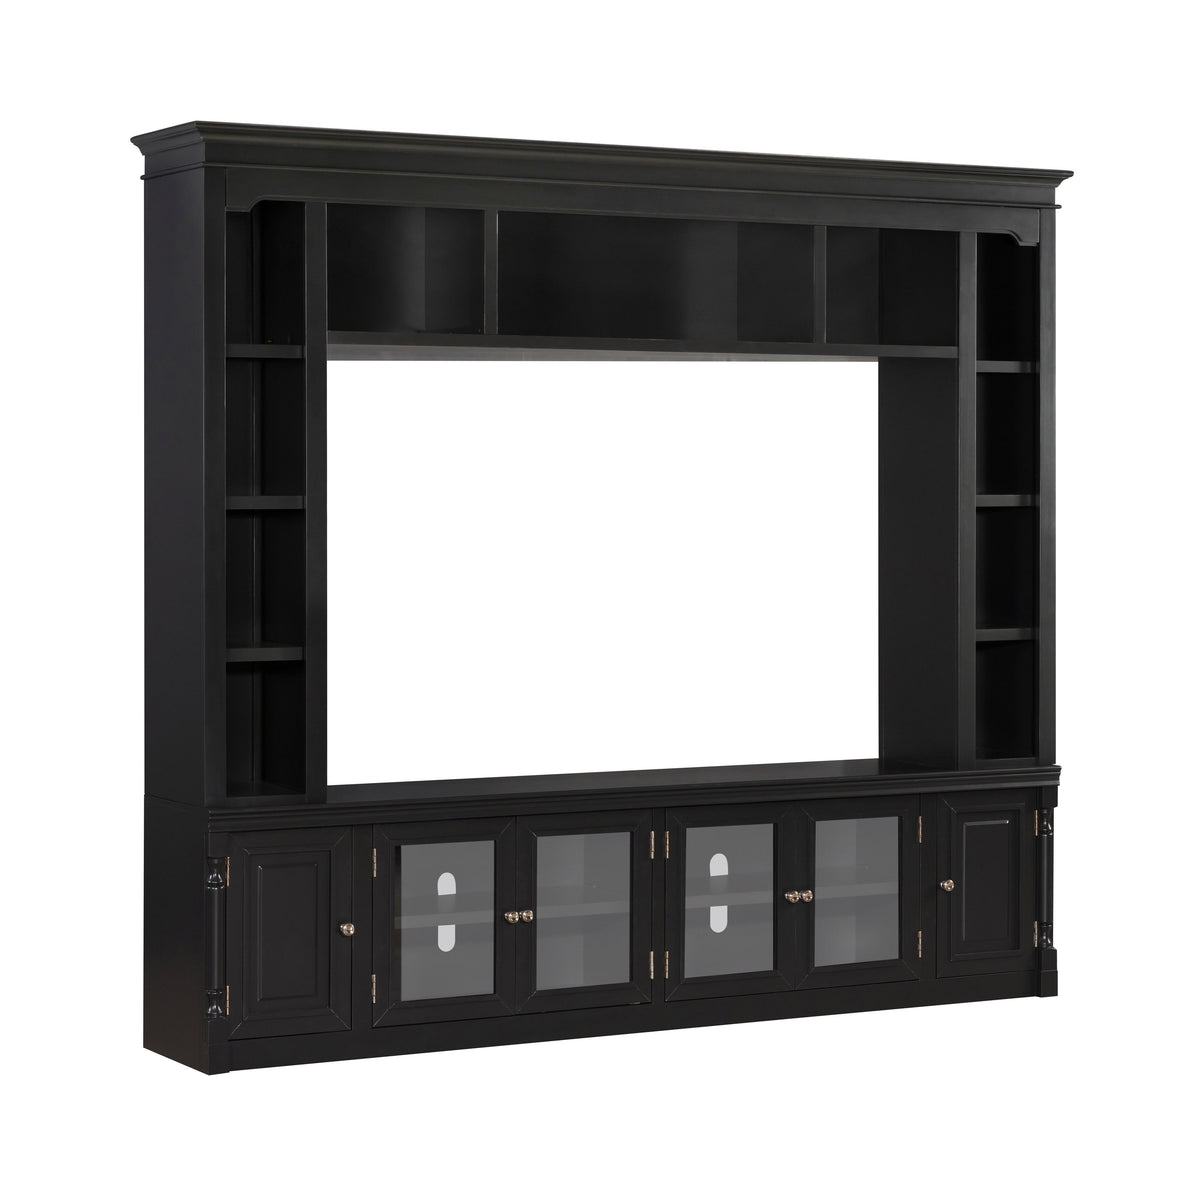 TOV Furniture Modern Virginia Charcoal Entertainment Center for TVs up to 75" - REN-E1037-97-ENT